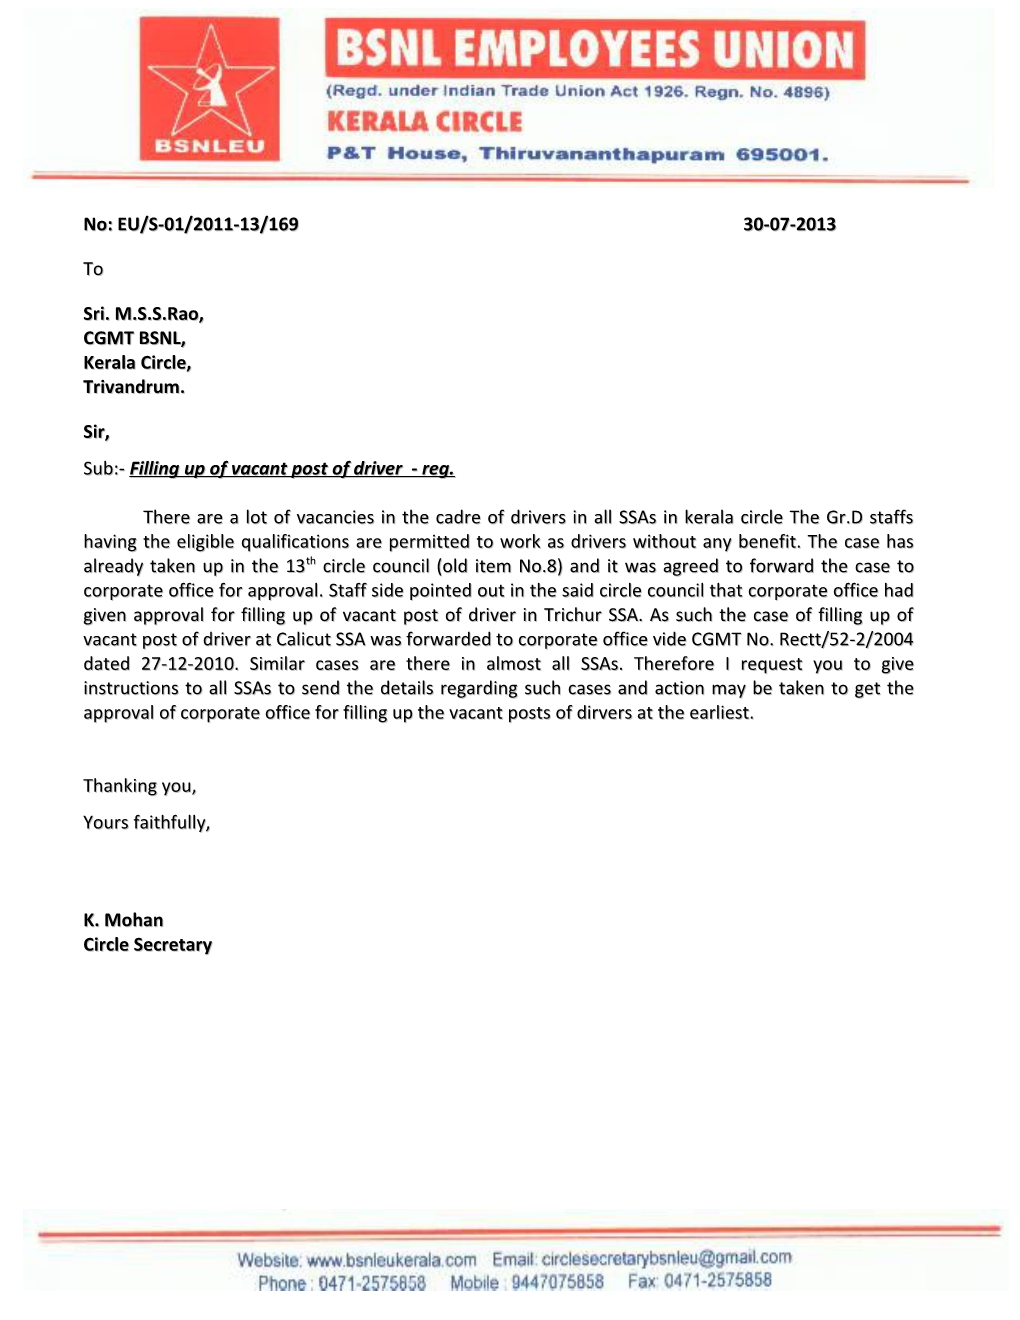 Sub:- JTO LICE Held on 02/06/2013 - Request for Liberalized Valuation